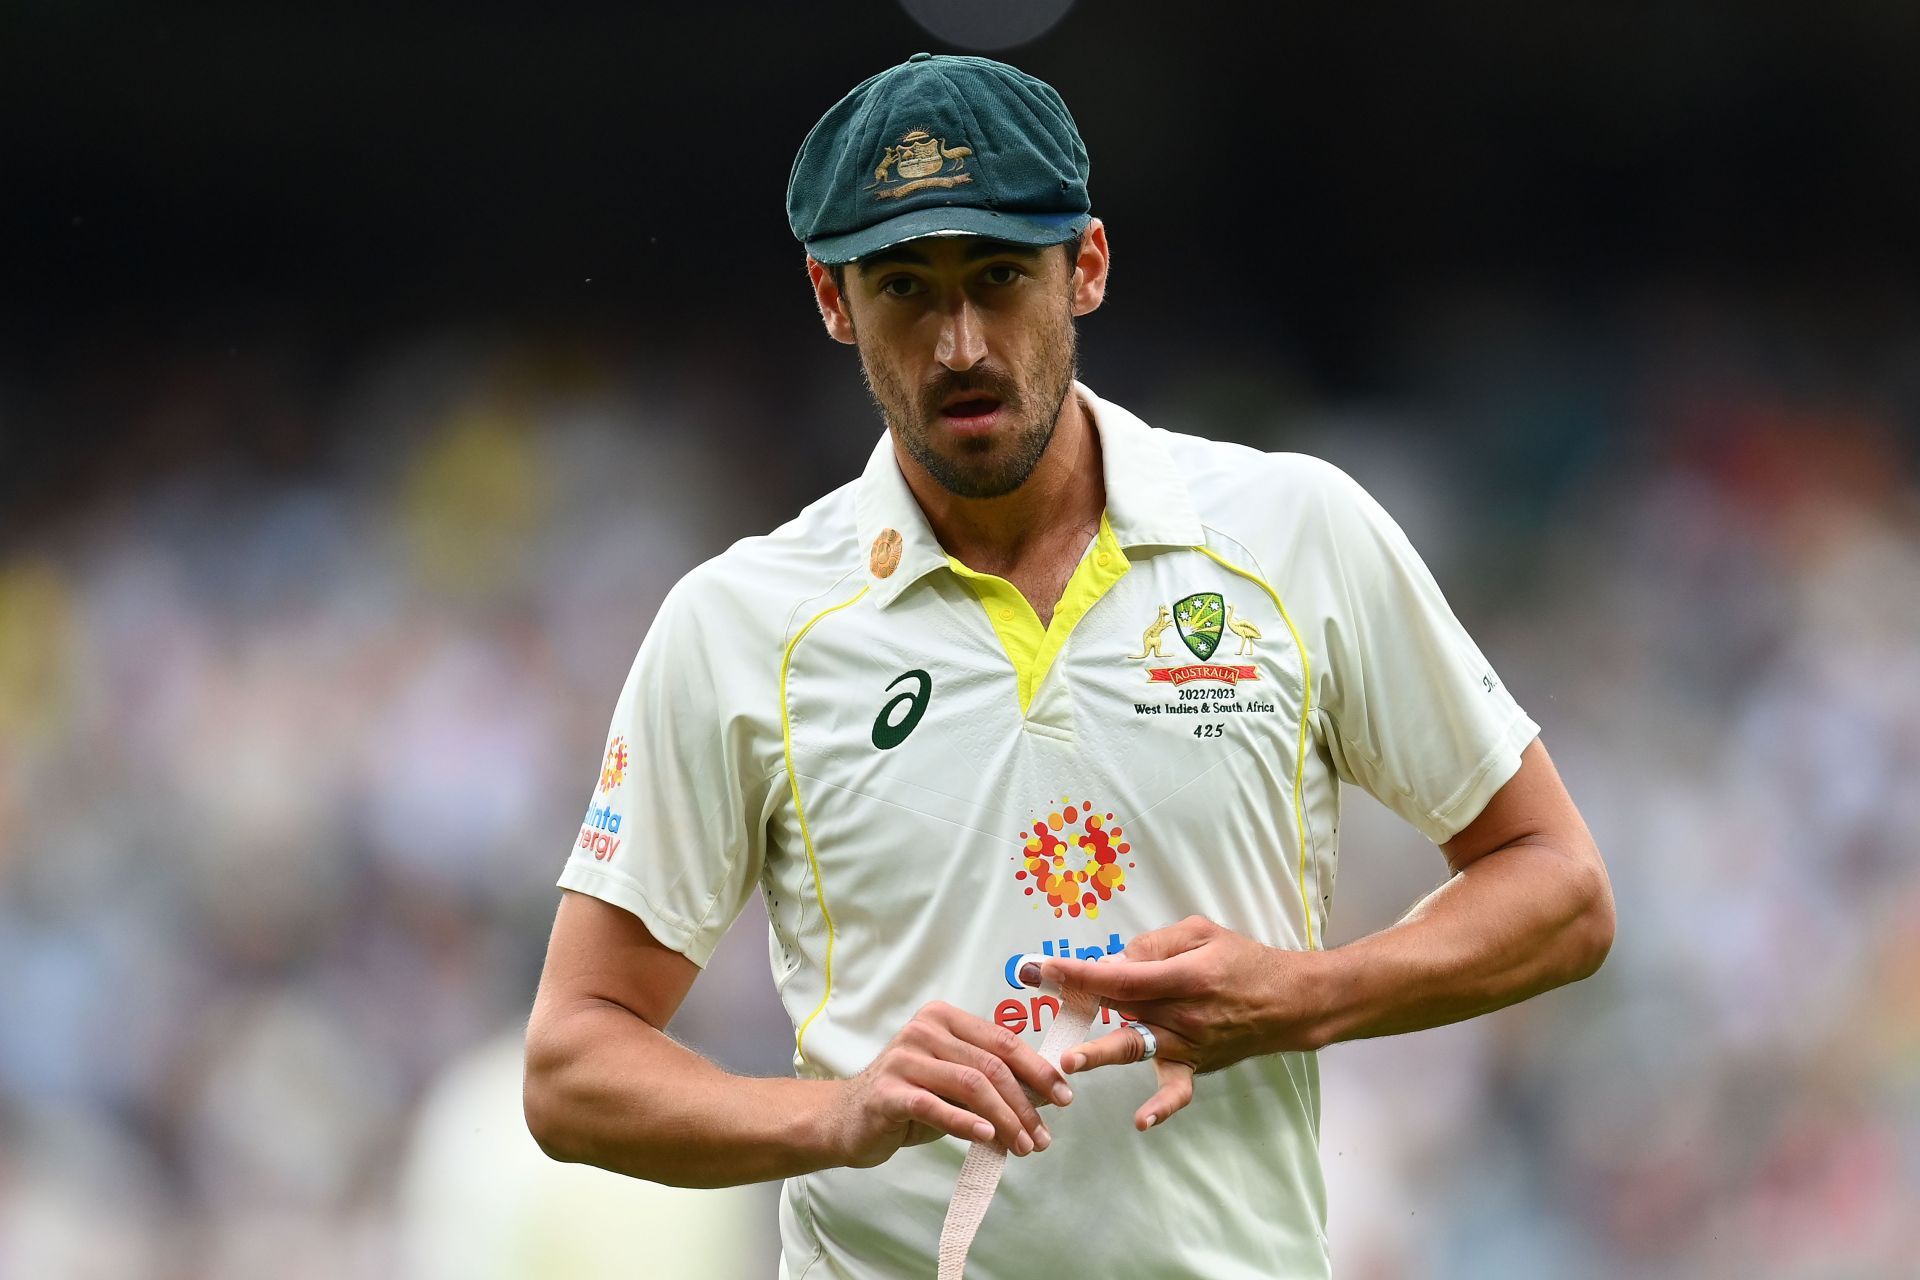 Mitchell Starc could be doubtful for the India tour. (Credits: Getty)